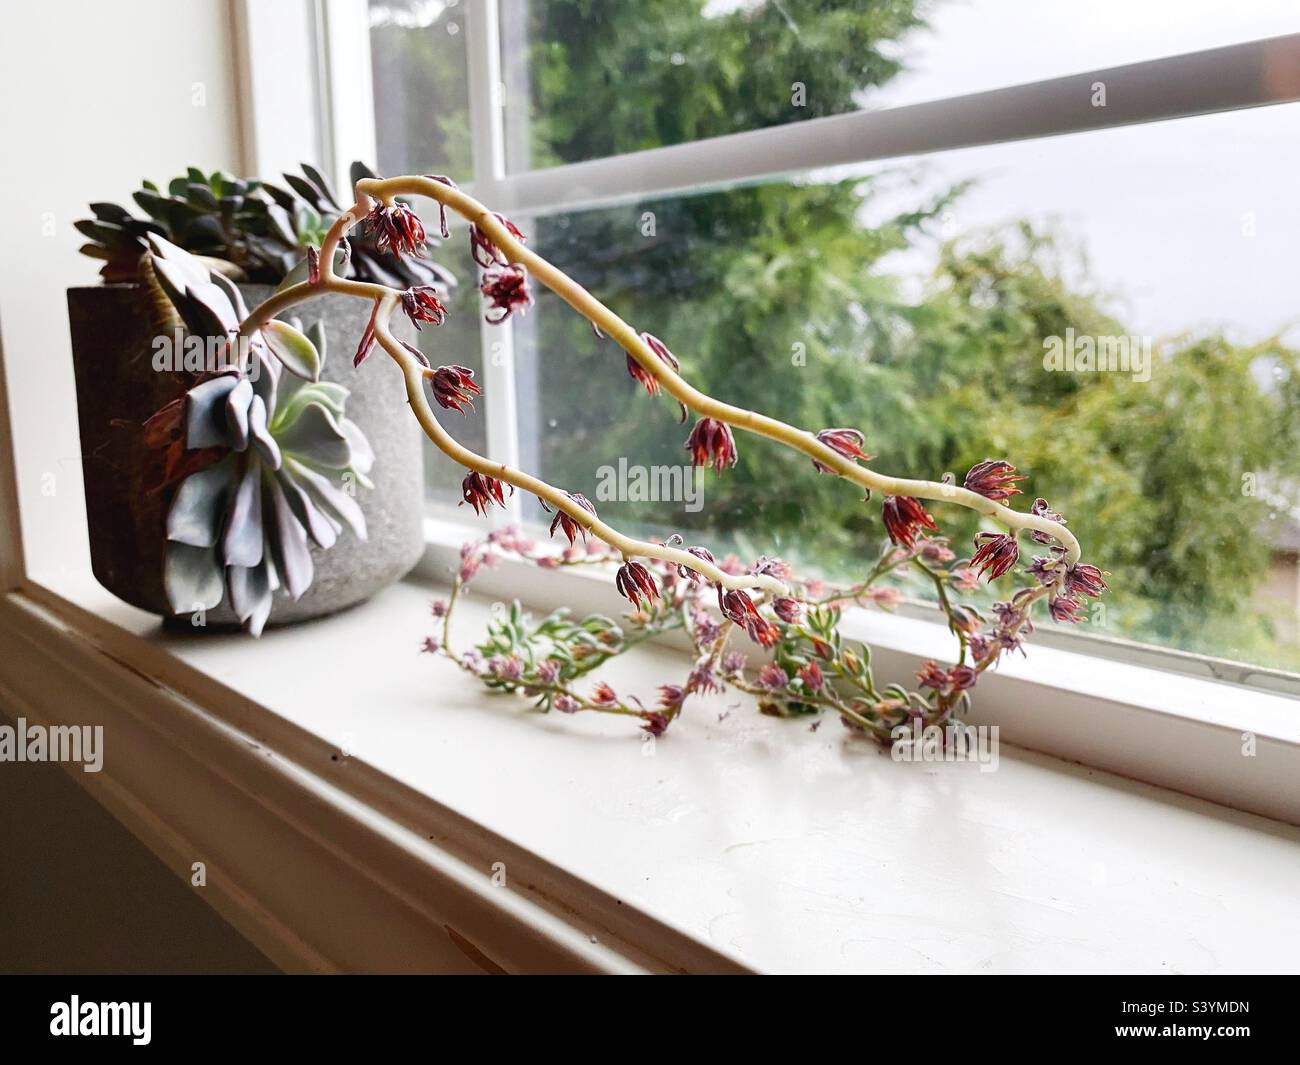 A flowering echeveria plant on a window sill. Stock Photo